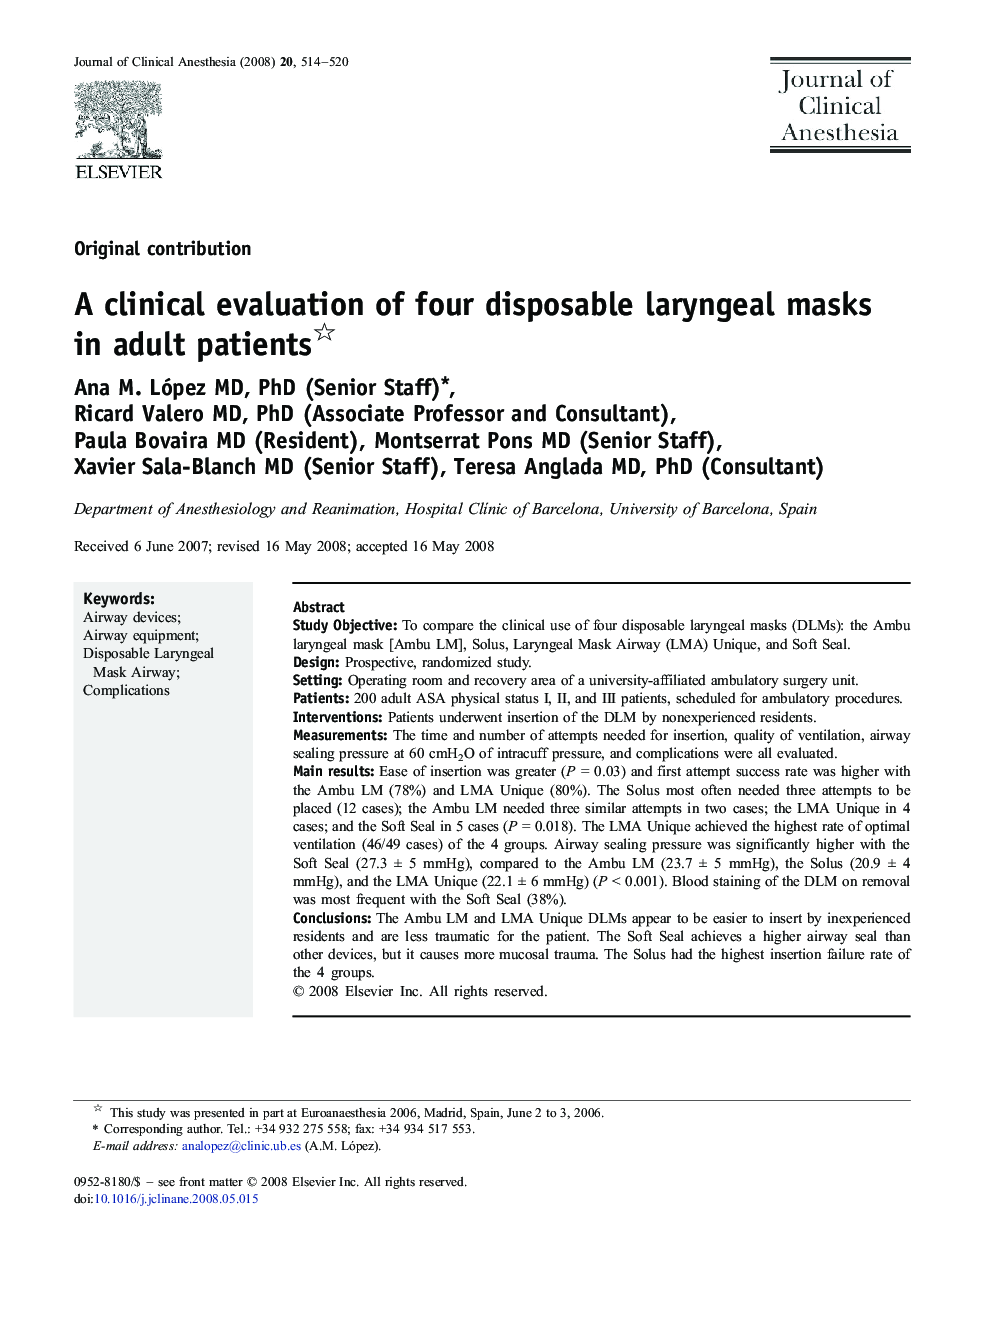 A clinical evaluation of four disposable laryngeal masks in adult patients 